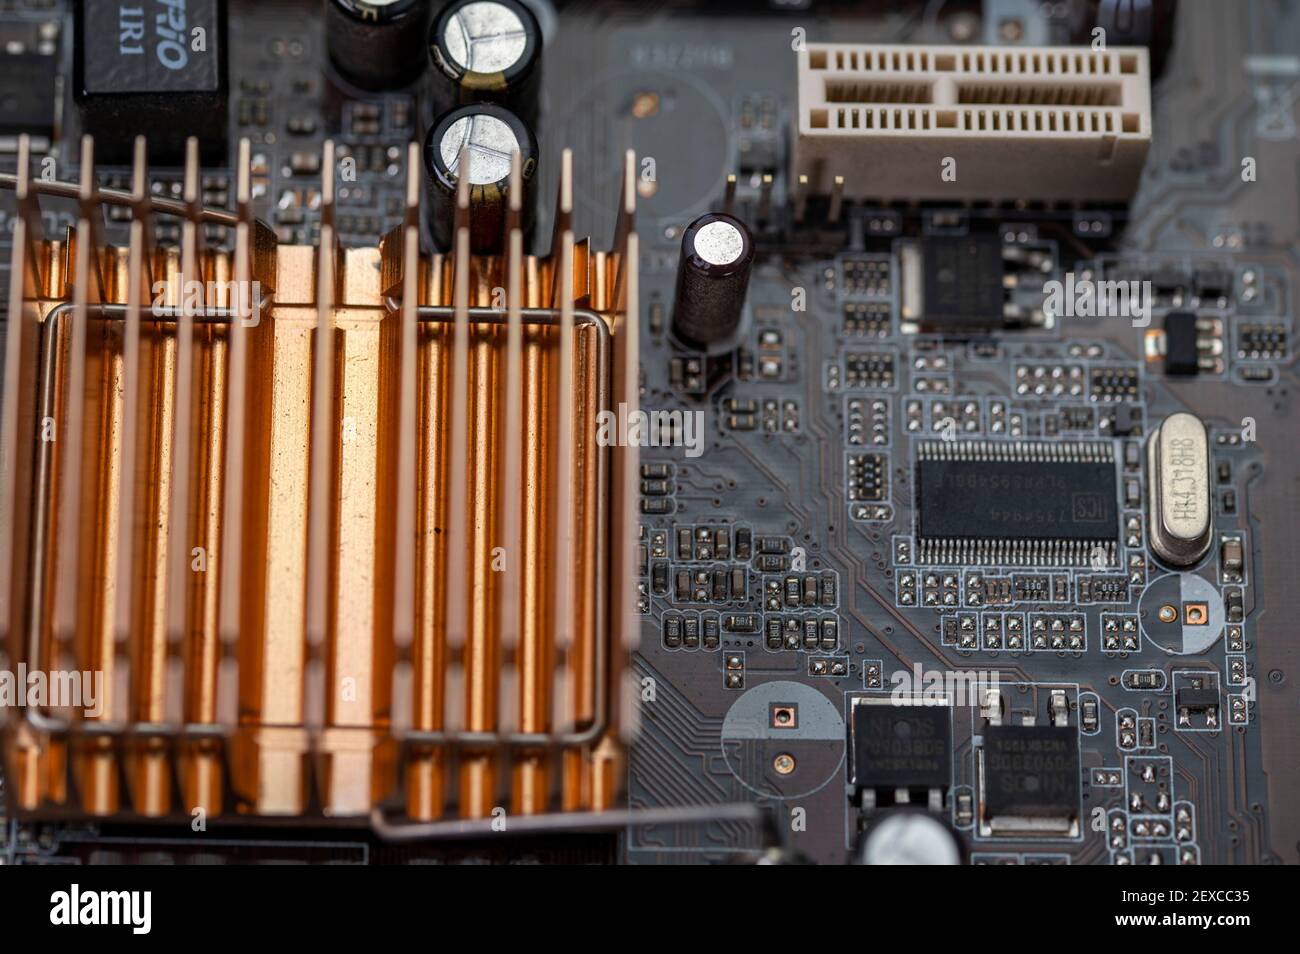 detail of a motherboard with connectors and heatsinks Stock Photo